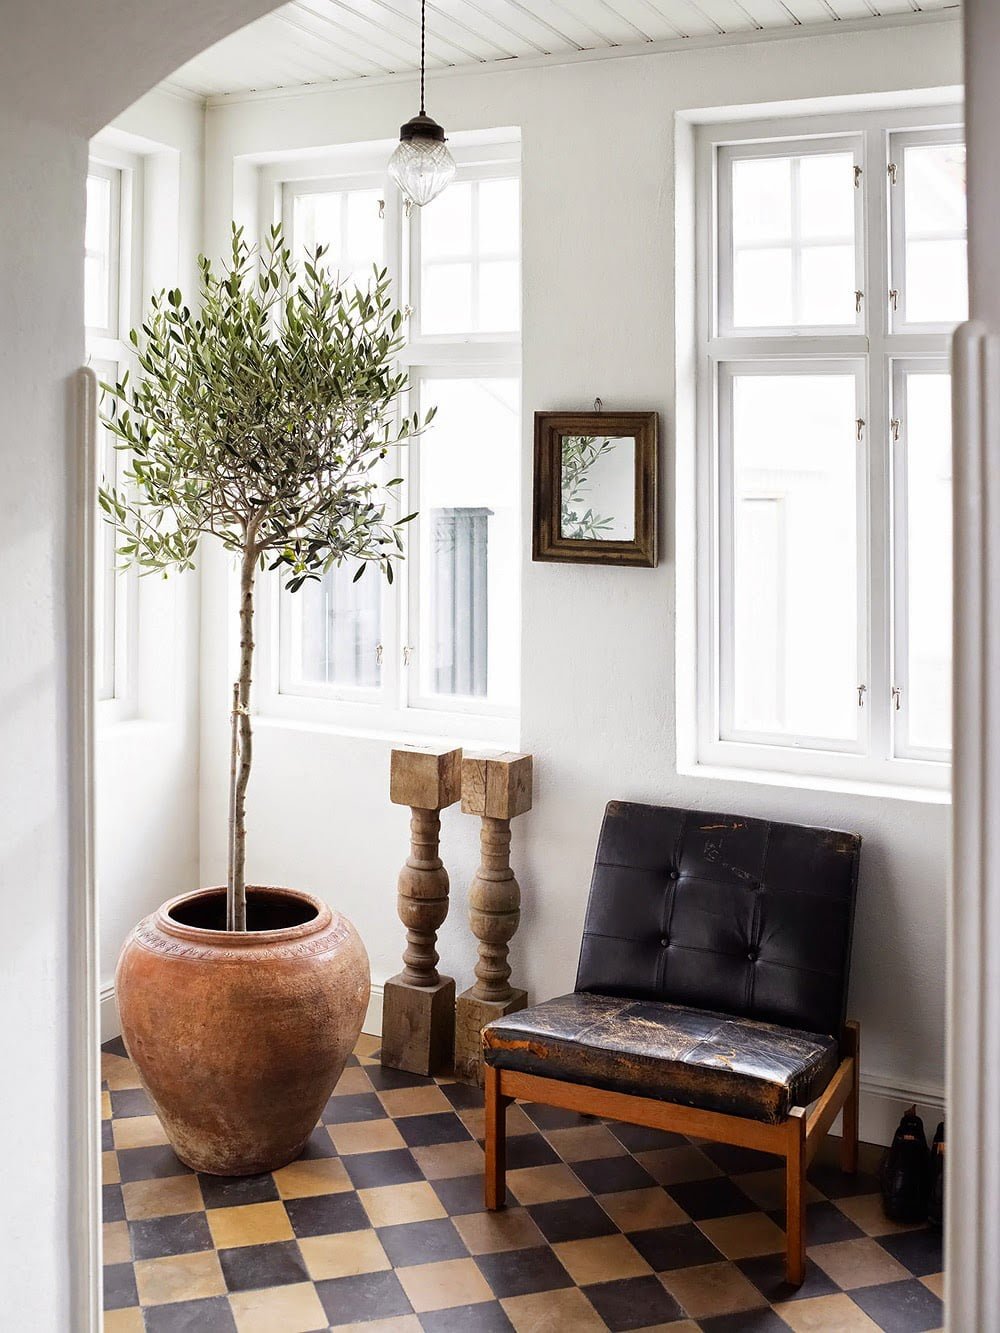 Mediterranean vibe brought in a home through an olive tree